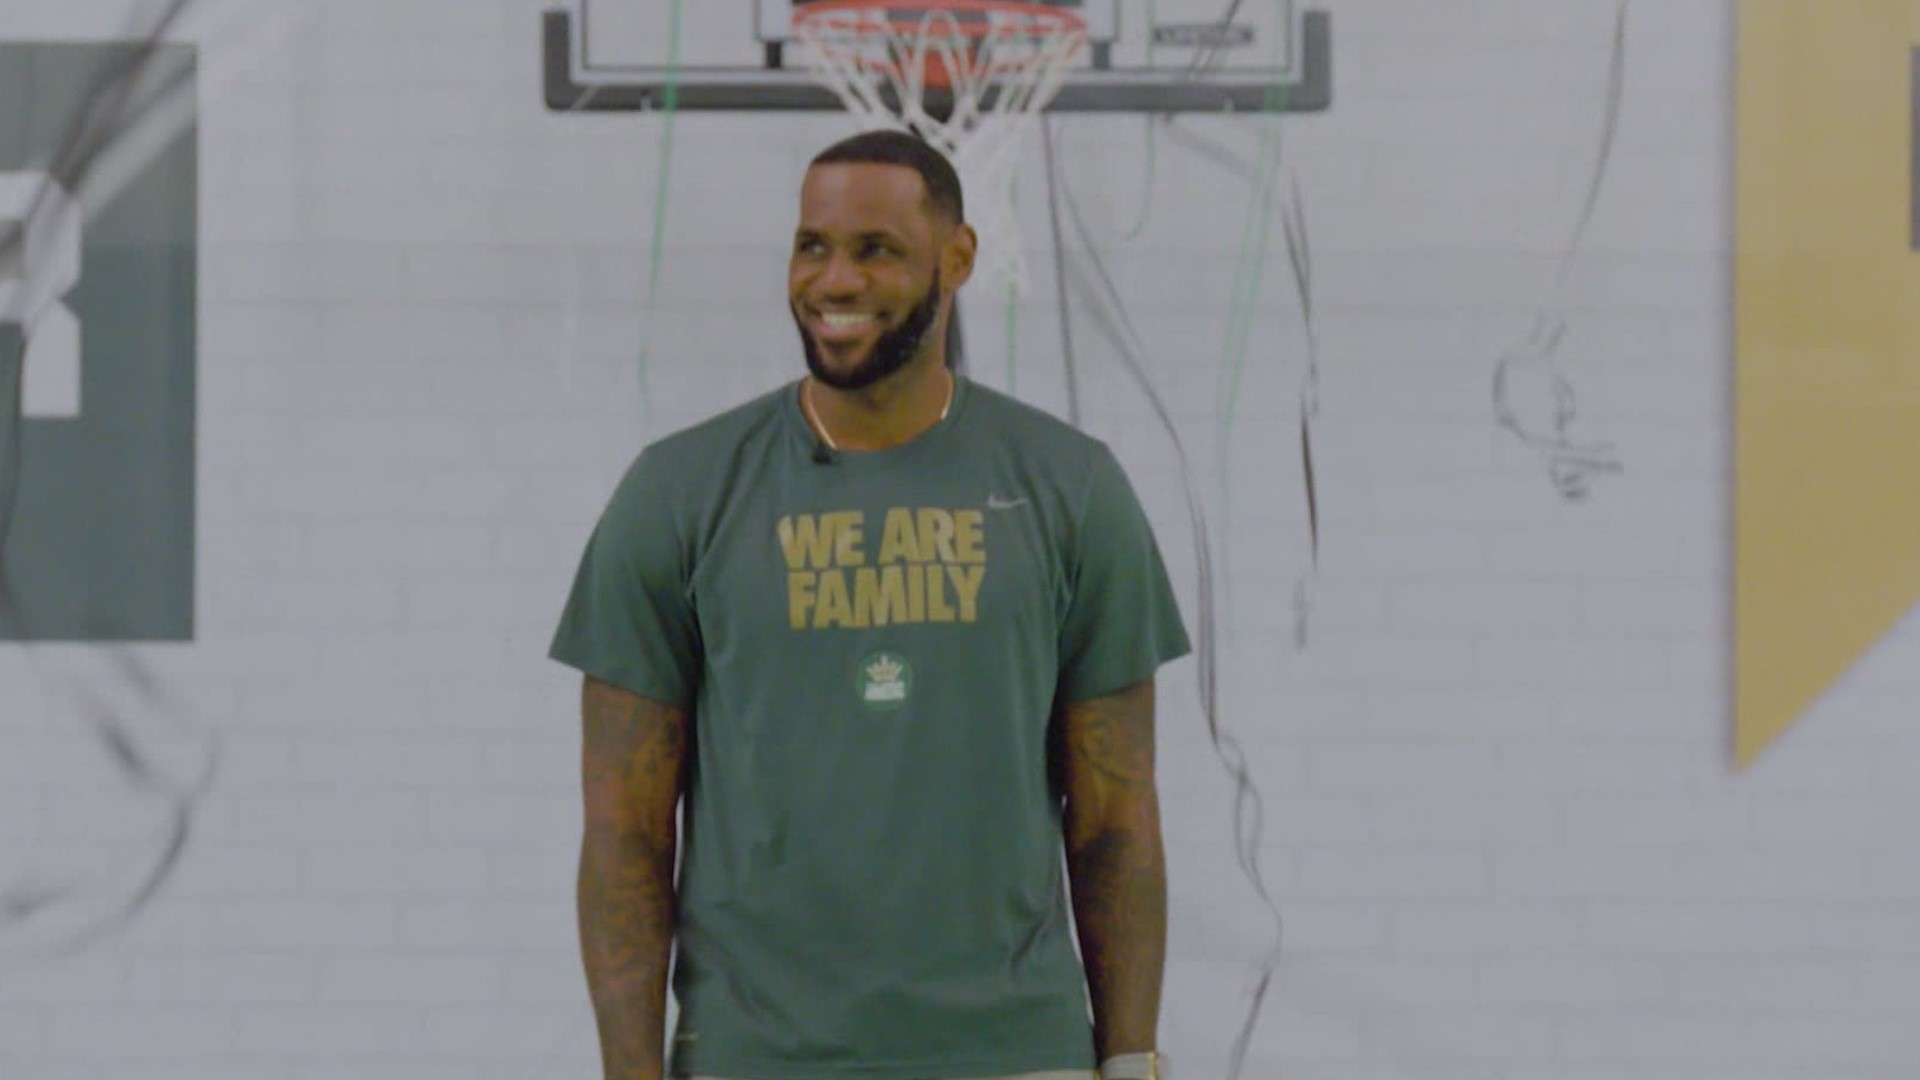 May 10, 2019: The hometown hero was back at his alma mater for a special surprise Thursday. Students from the I PROMISE School were visiting St. Vincent – St. Mary High School when LeBron James dropped by with a check for $1 million. That money will be used to build a new gym at the I PROMISE School.